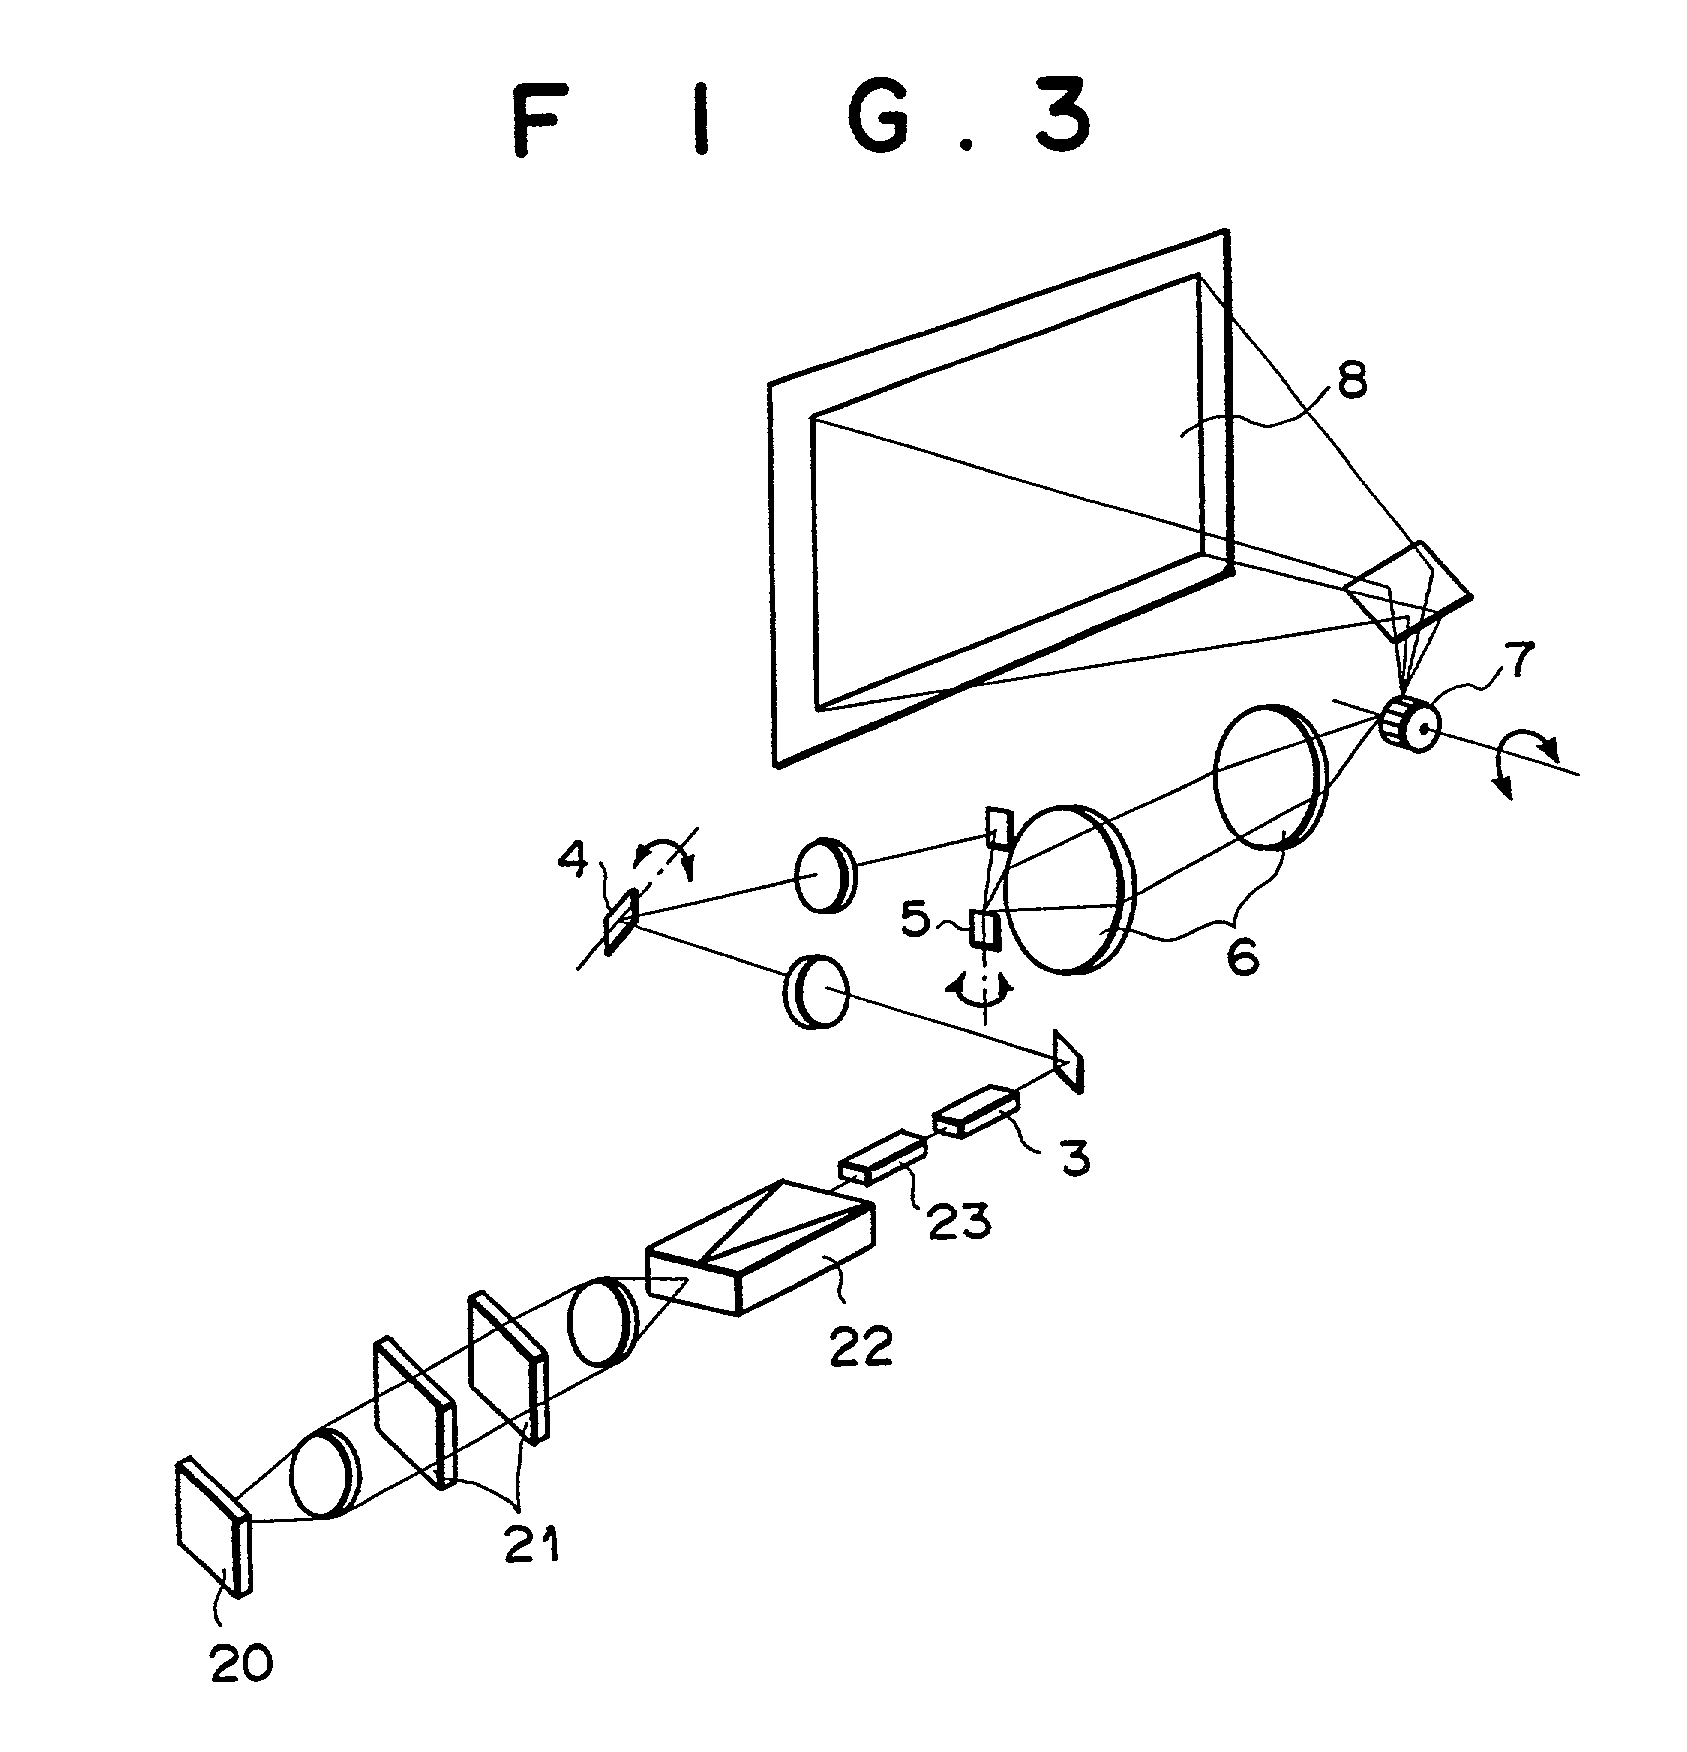 Color laser display apparatus having fluorescent screen scanned with modulated ultraviolet laser light